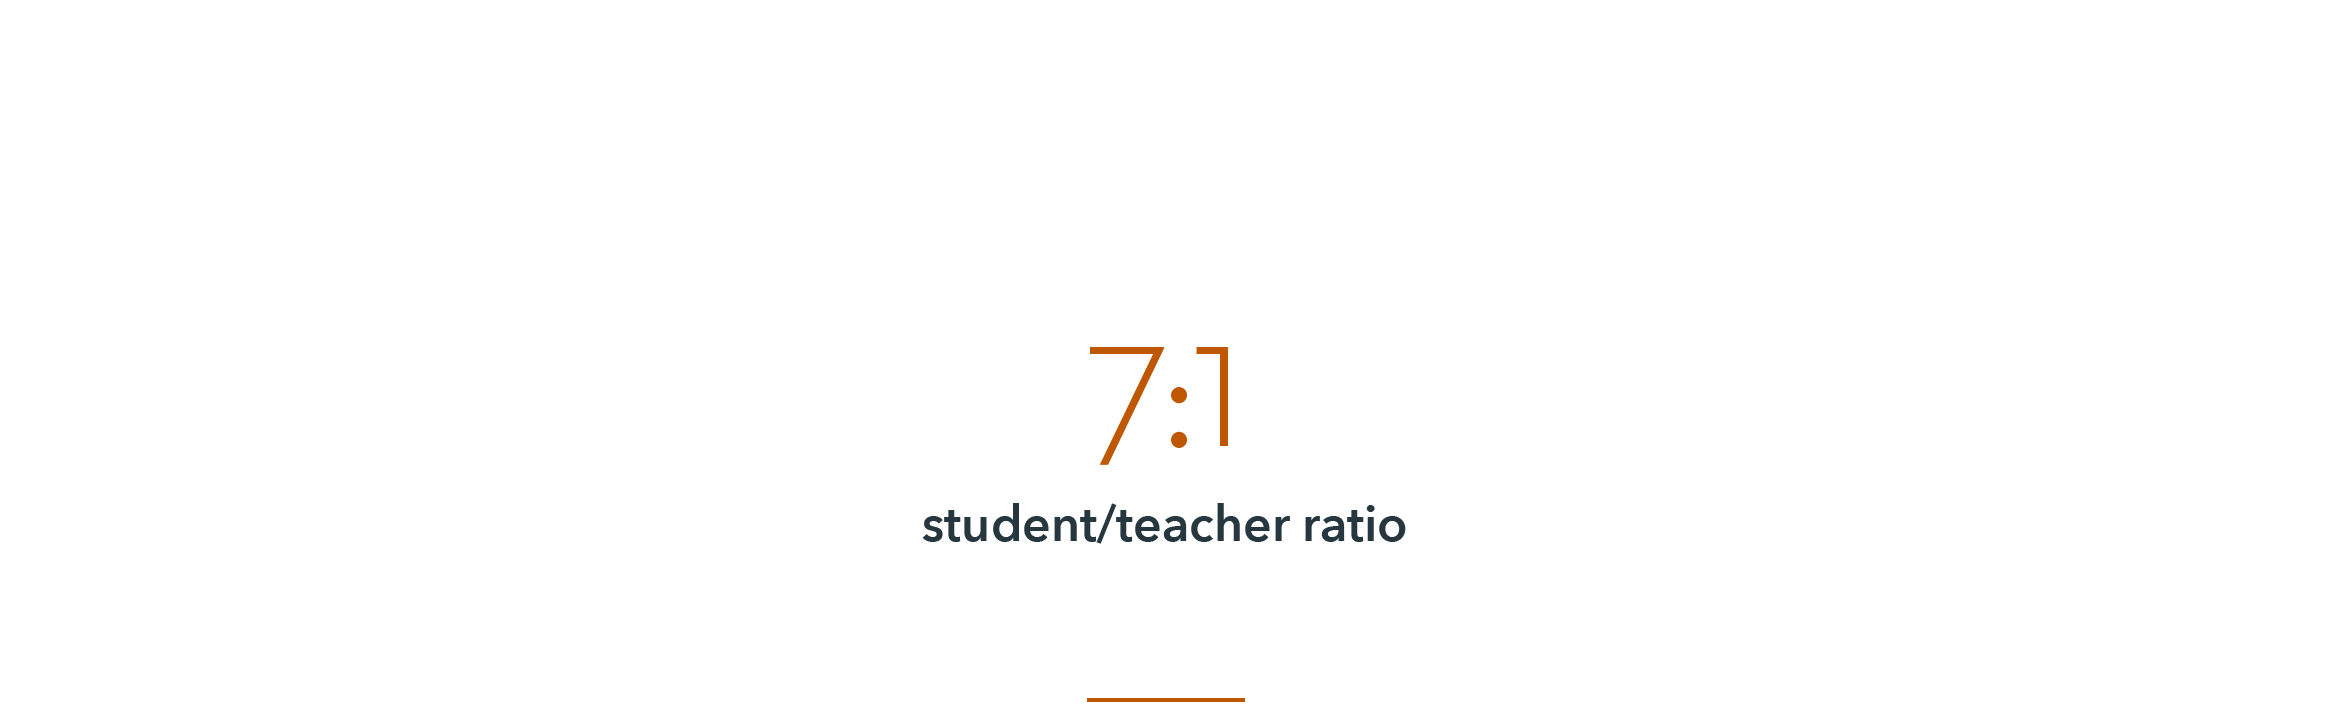 Infographic: 7 to 1 student/faculty ratio